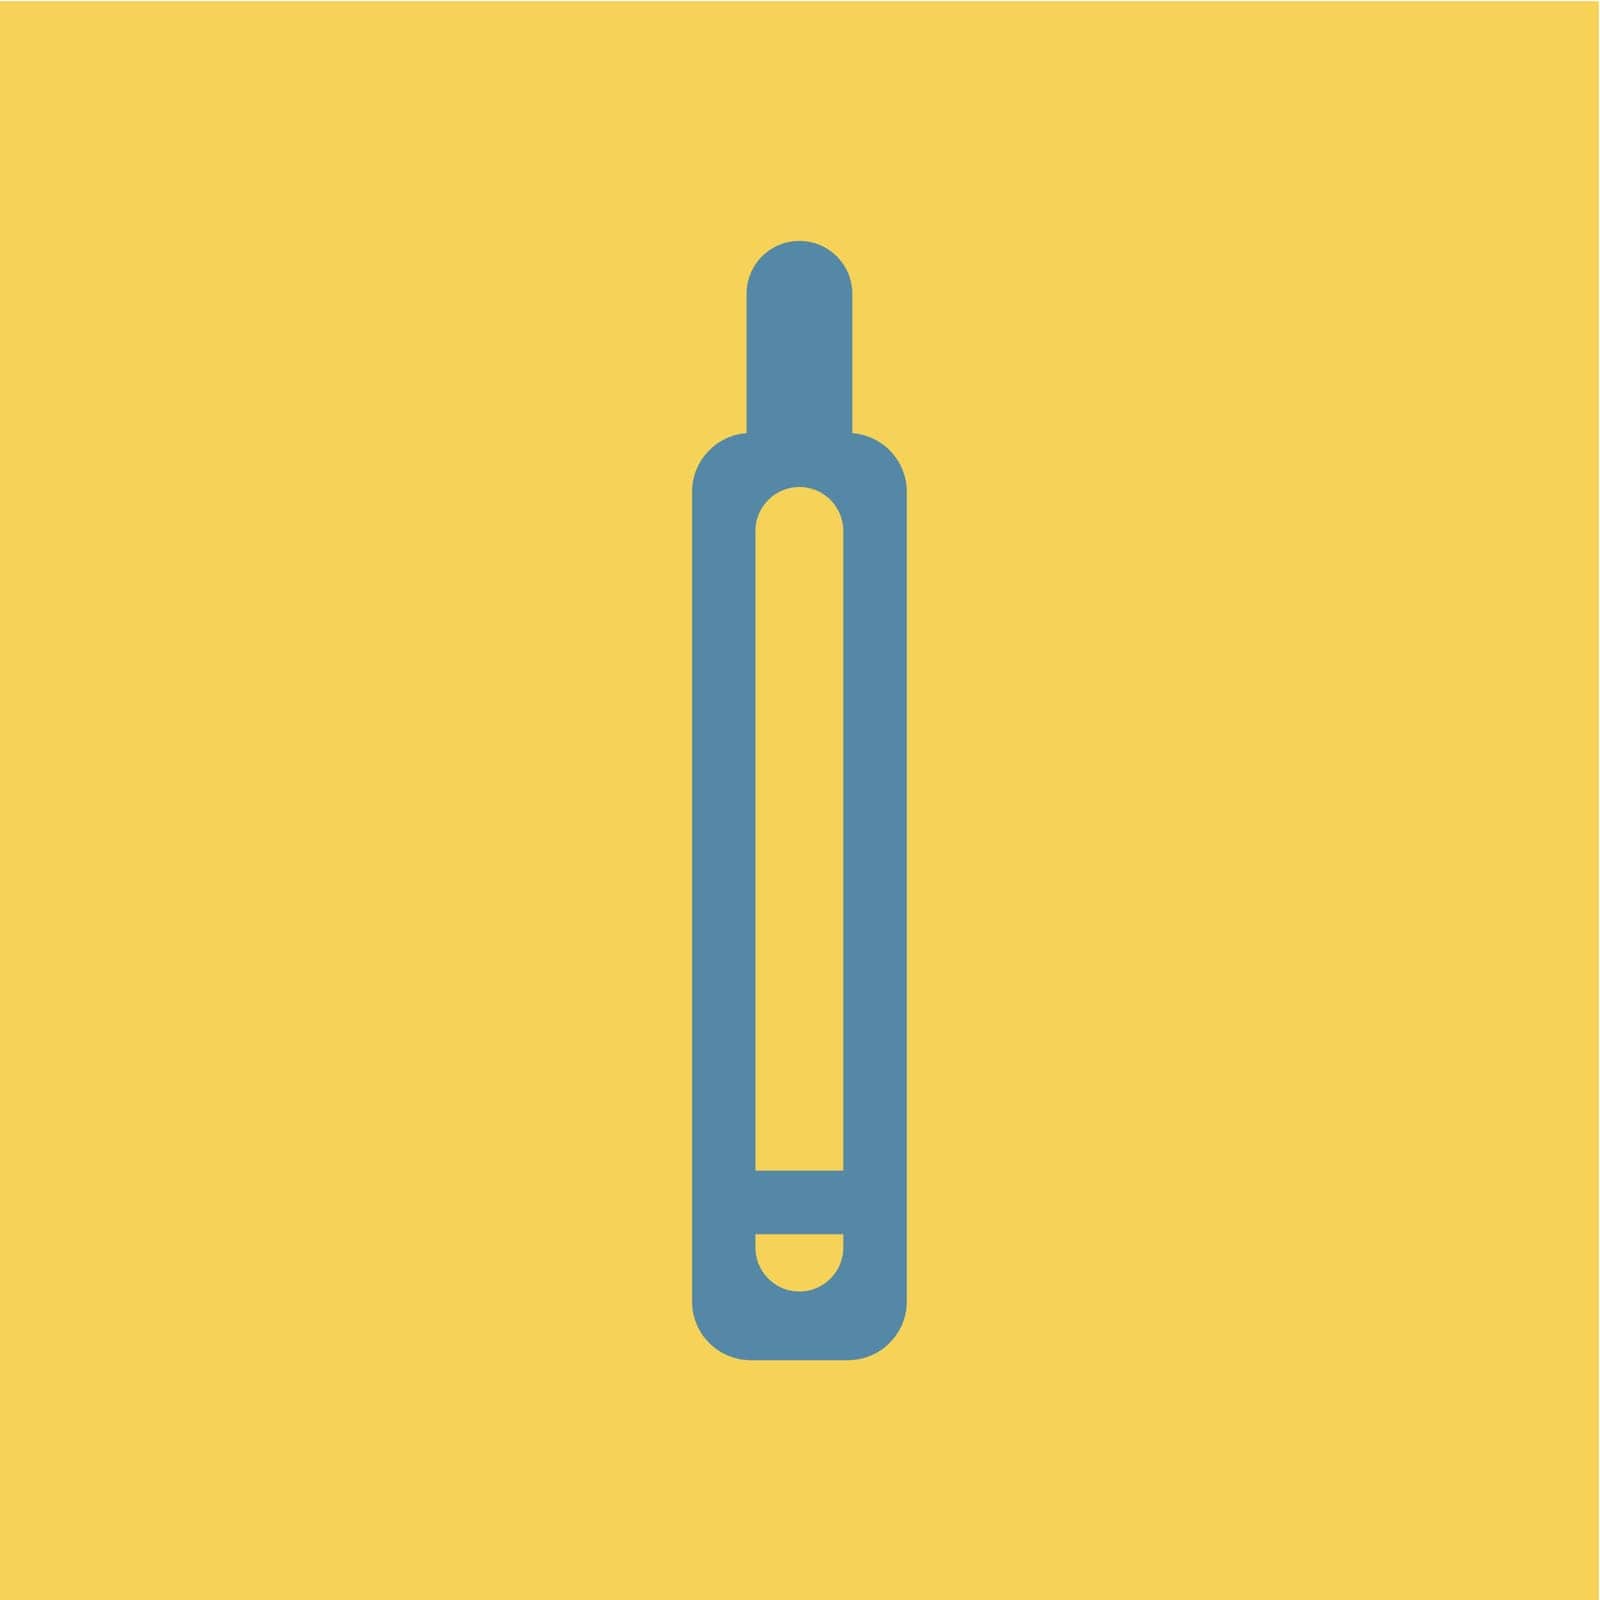 heat,medical,icon,cold,instrument,hot,measurement,healthcare,realistic,white,flat,electronic,temperature,macro,glass,test,degree,health,medicine,flu,tool,doctor,classic,celsius,thermometer,care